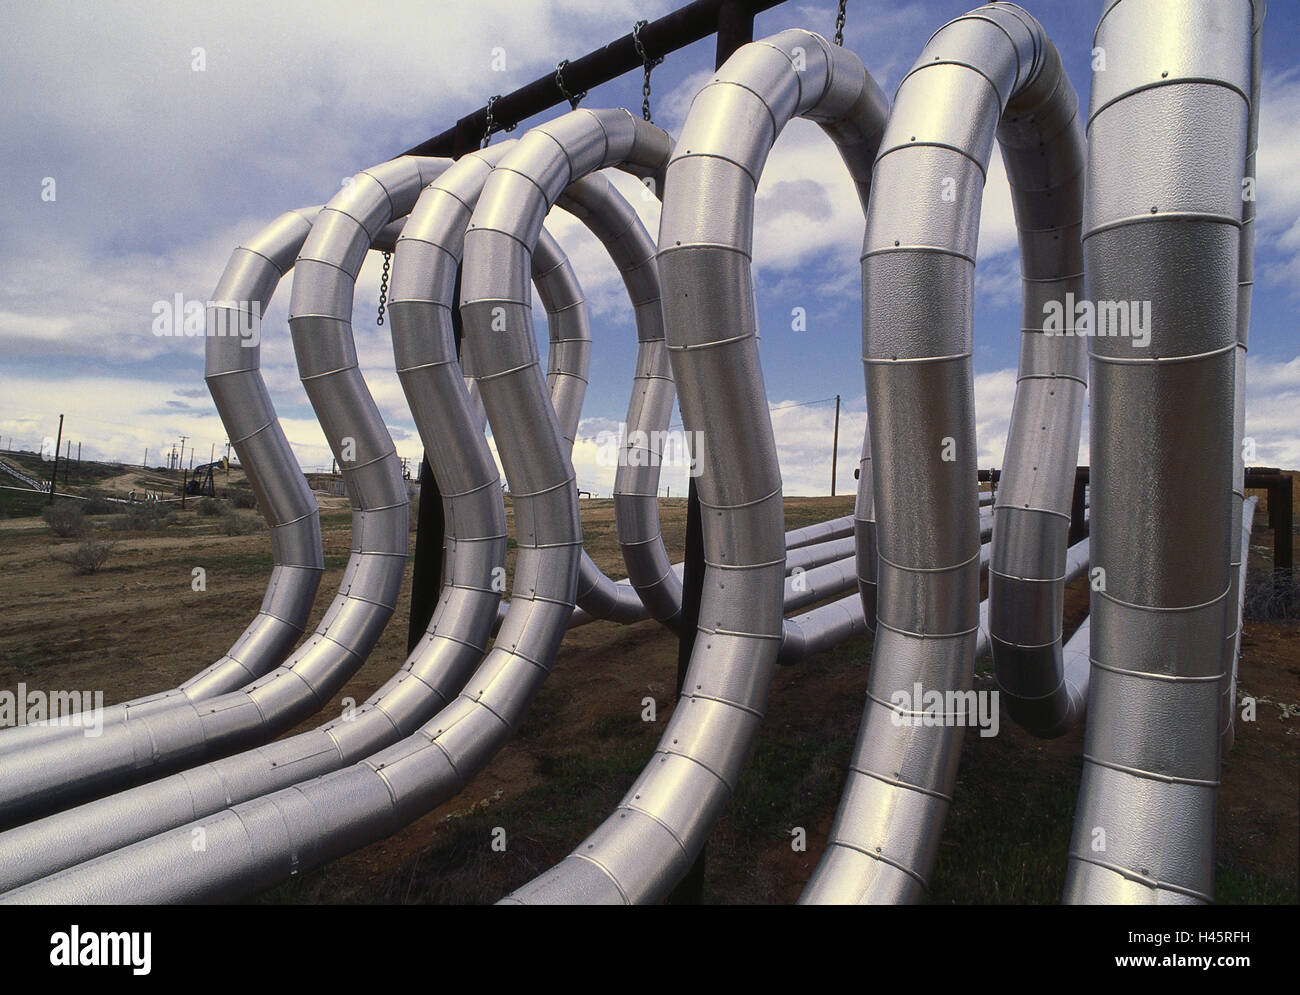 The USA, California, oil refinery, circuits, energy, oil, raw material, to pipe, economy, industry, deserted, outside, form, curved, heaven, clouds, scenery, Stock Photo